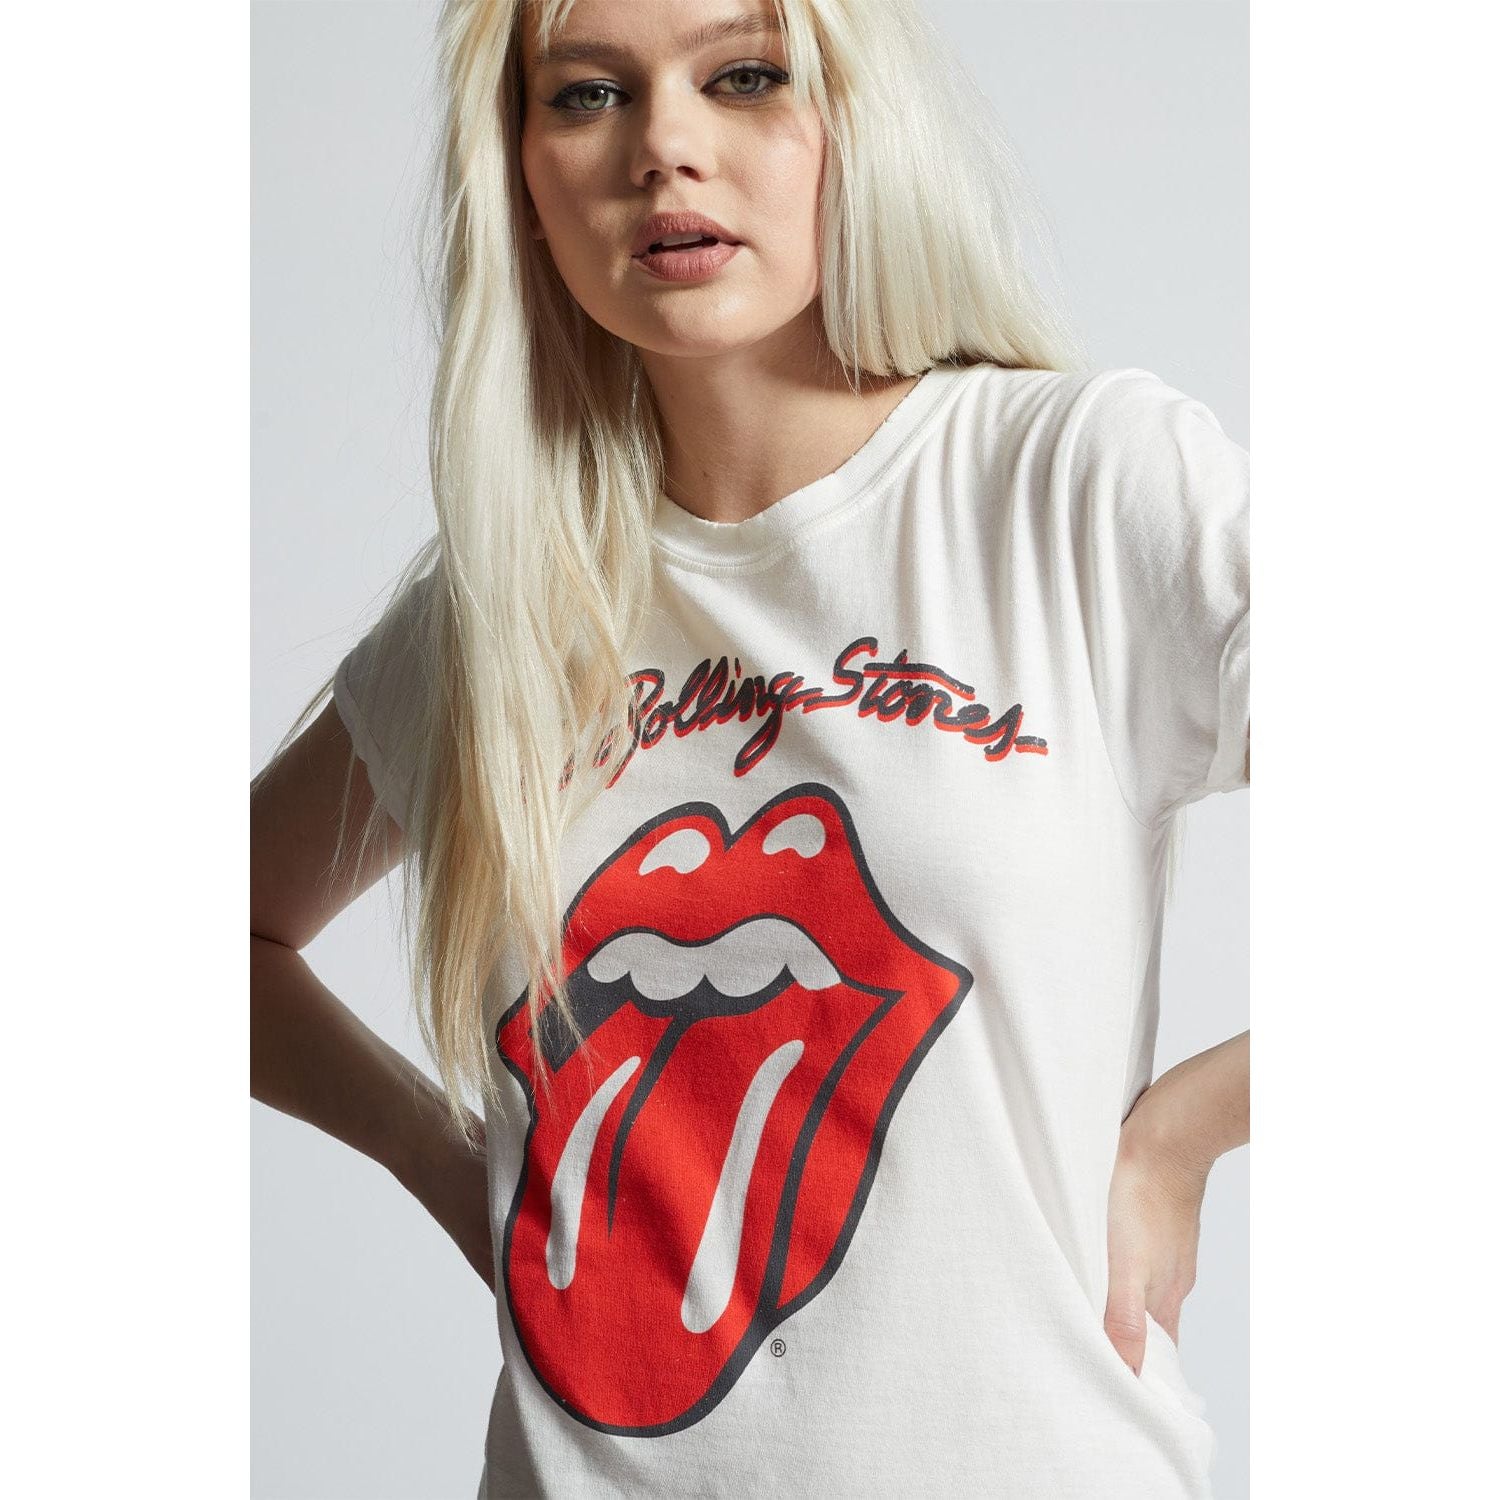 Recycled Karma Recycled Karma Rolling Stones Live in Concert Tee